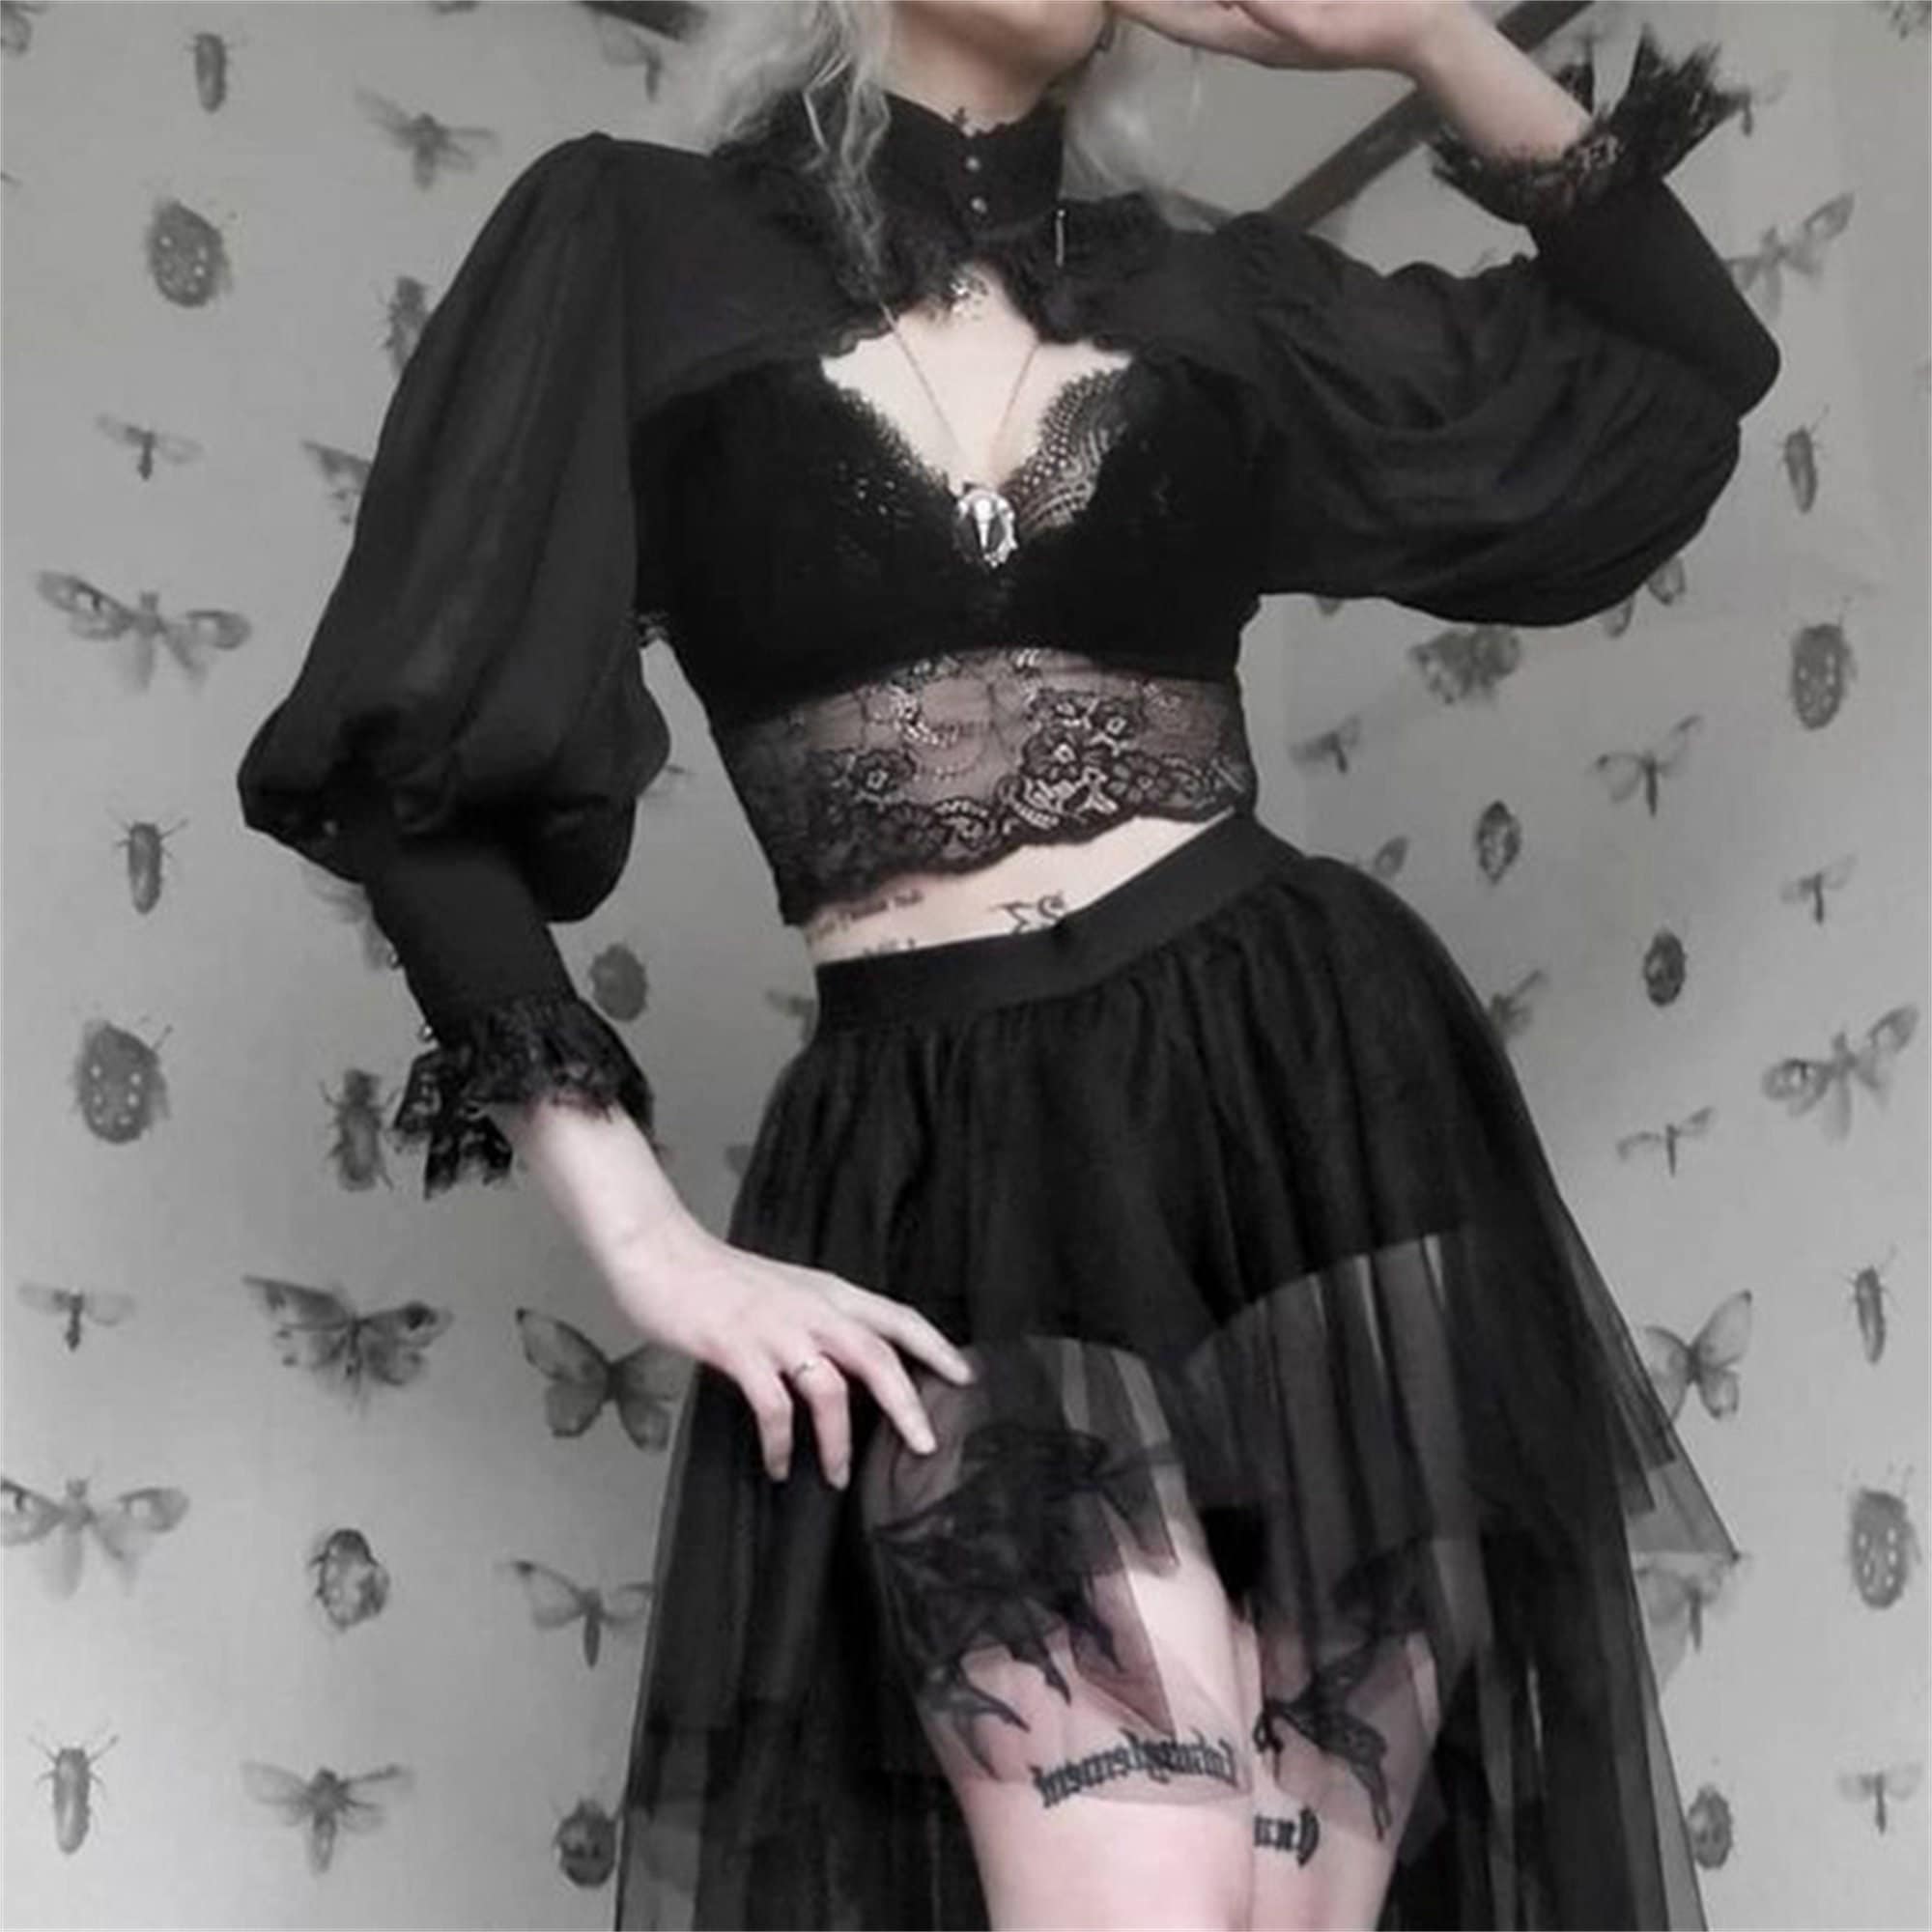 Dark Hollow Lace Palace Style High Collar Waistcoat Black Cosplay Witch Crop Top Gothic Sexy Tulle Puff Sleeve Top Gothic Sheer Crop Top